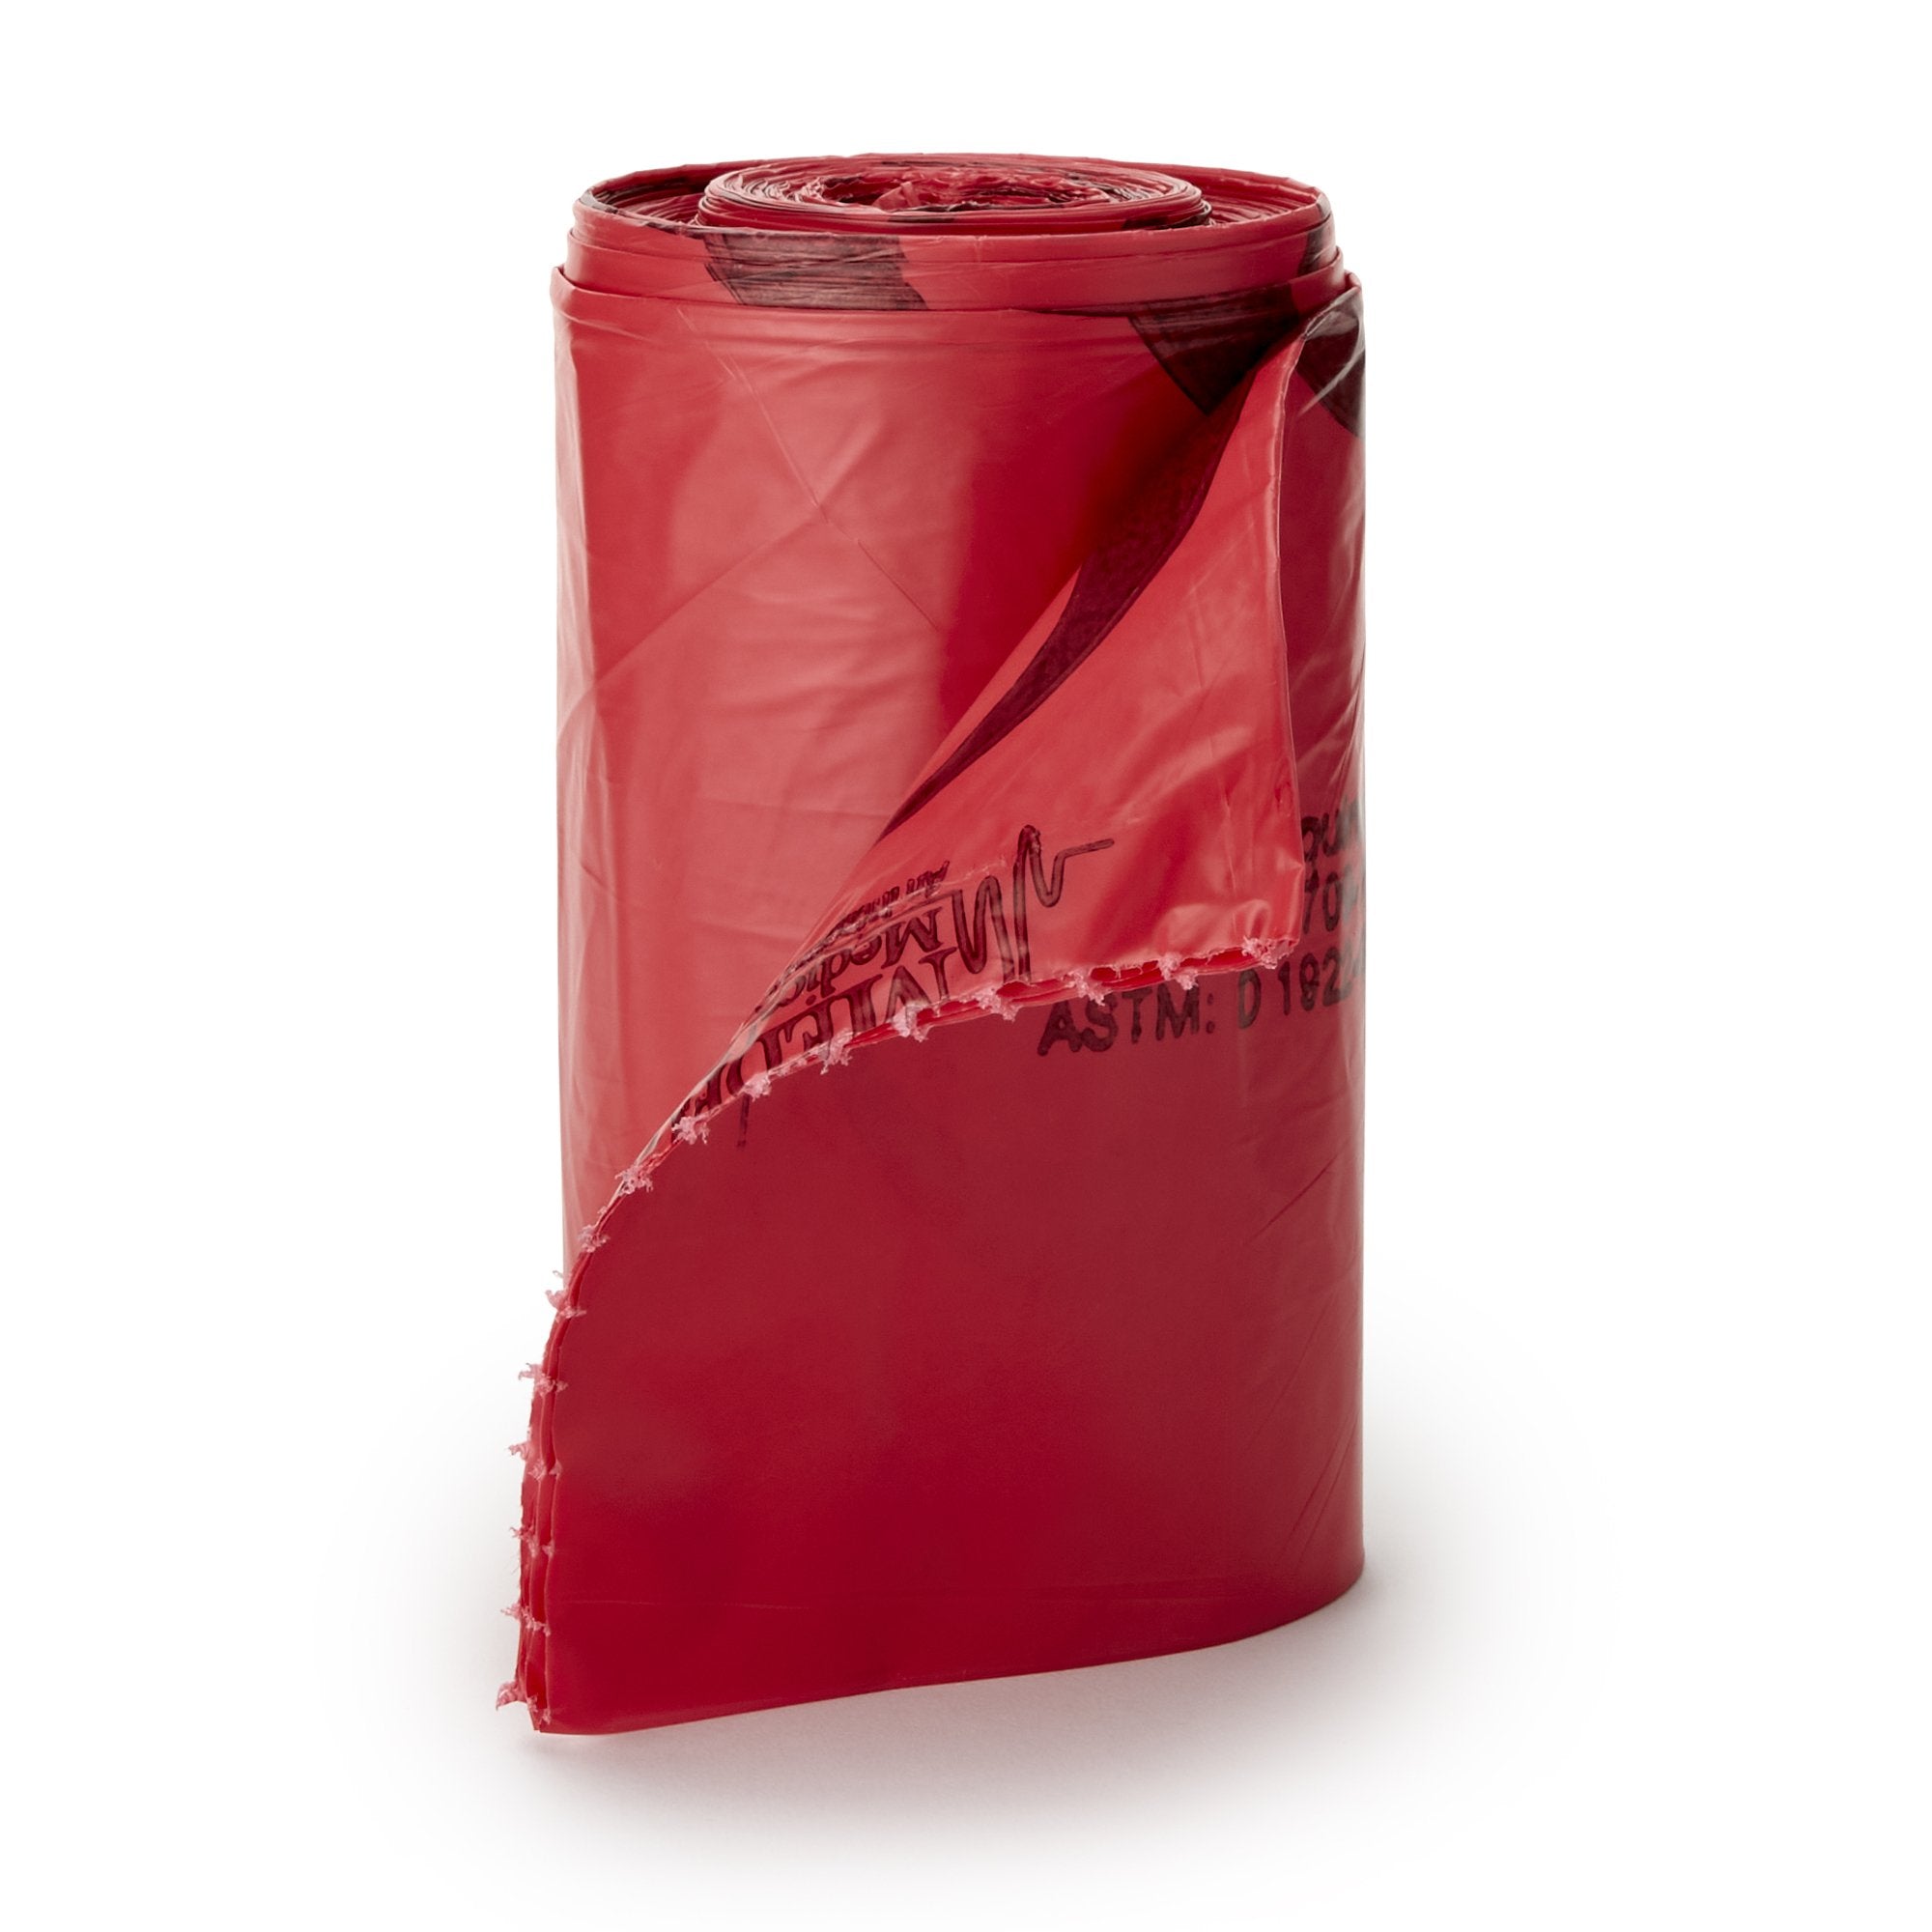 Infectious Waste Bag McKesson 10 to 15 gal. Red Bag 24 X 32 Inch